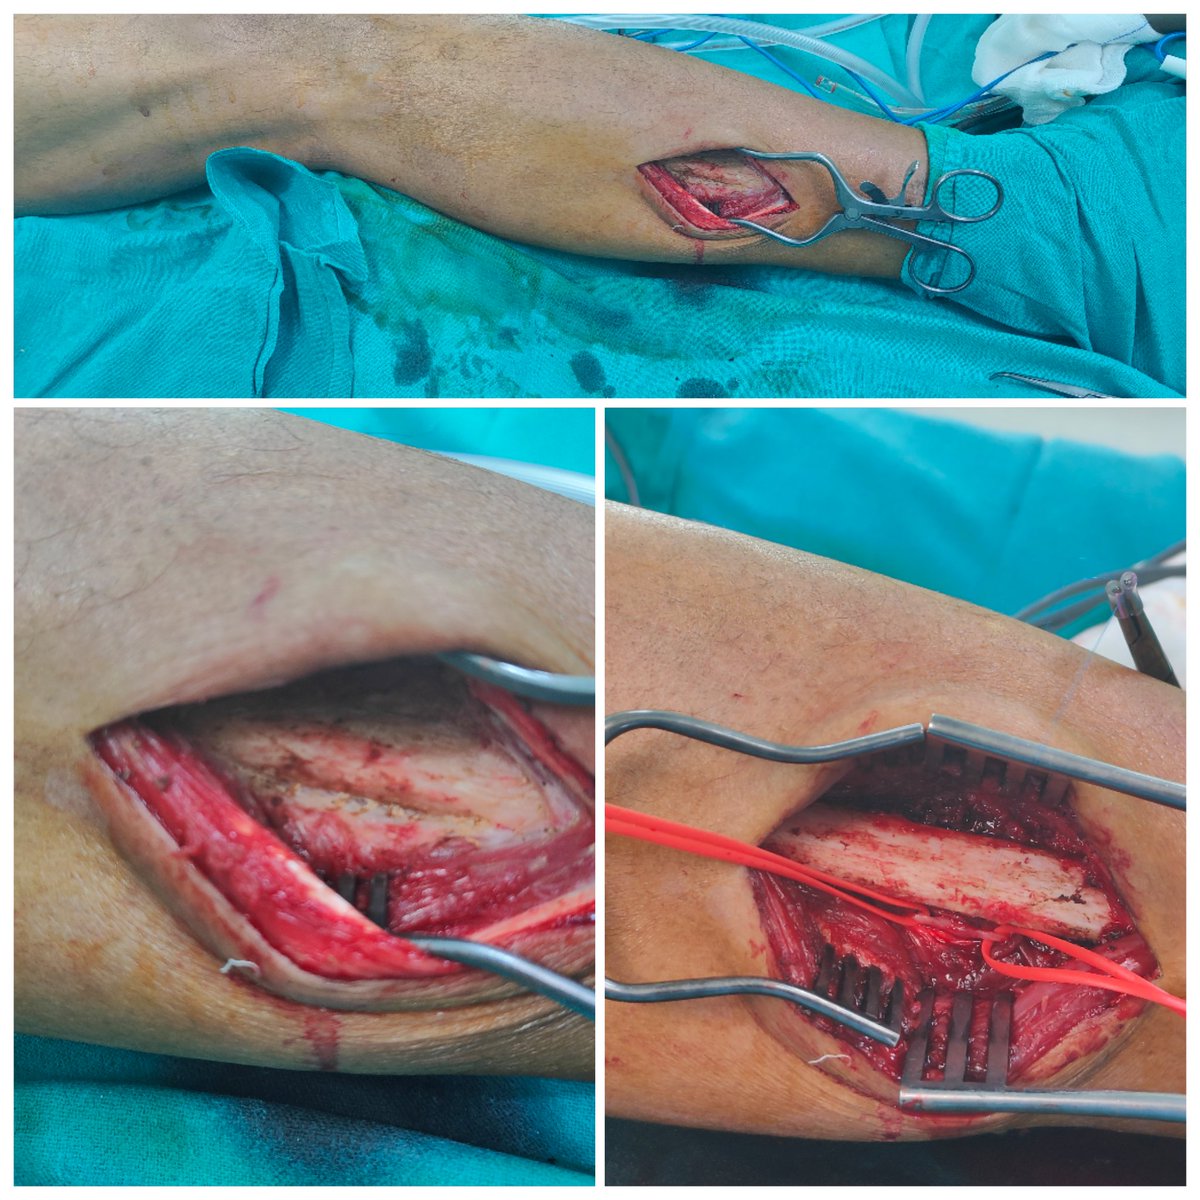 Peroneal artery lateral exposure without resecting the fibula for below knee bypass in a CLTI patient . @VarenyamVasc @tapishsahu @SavlaniaAjay @PShivanesandr @GAEscobarMD